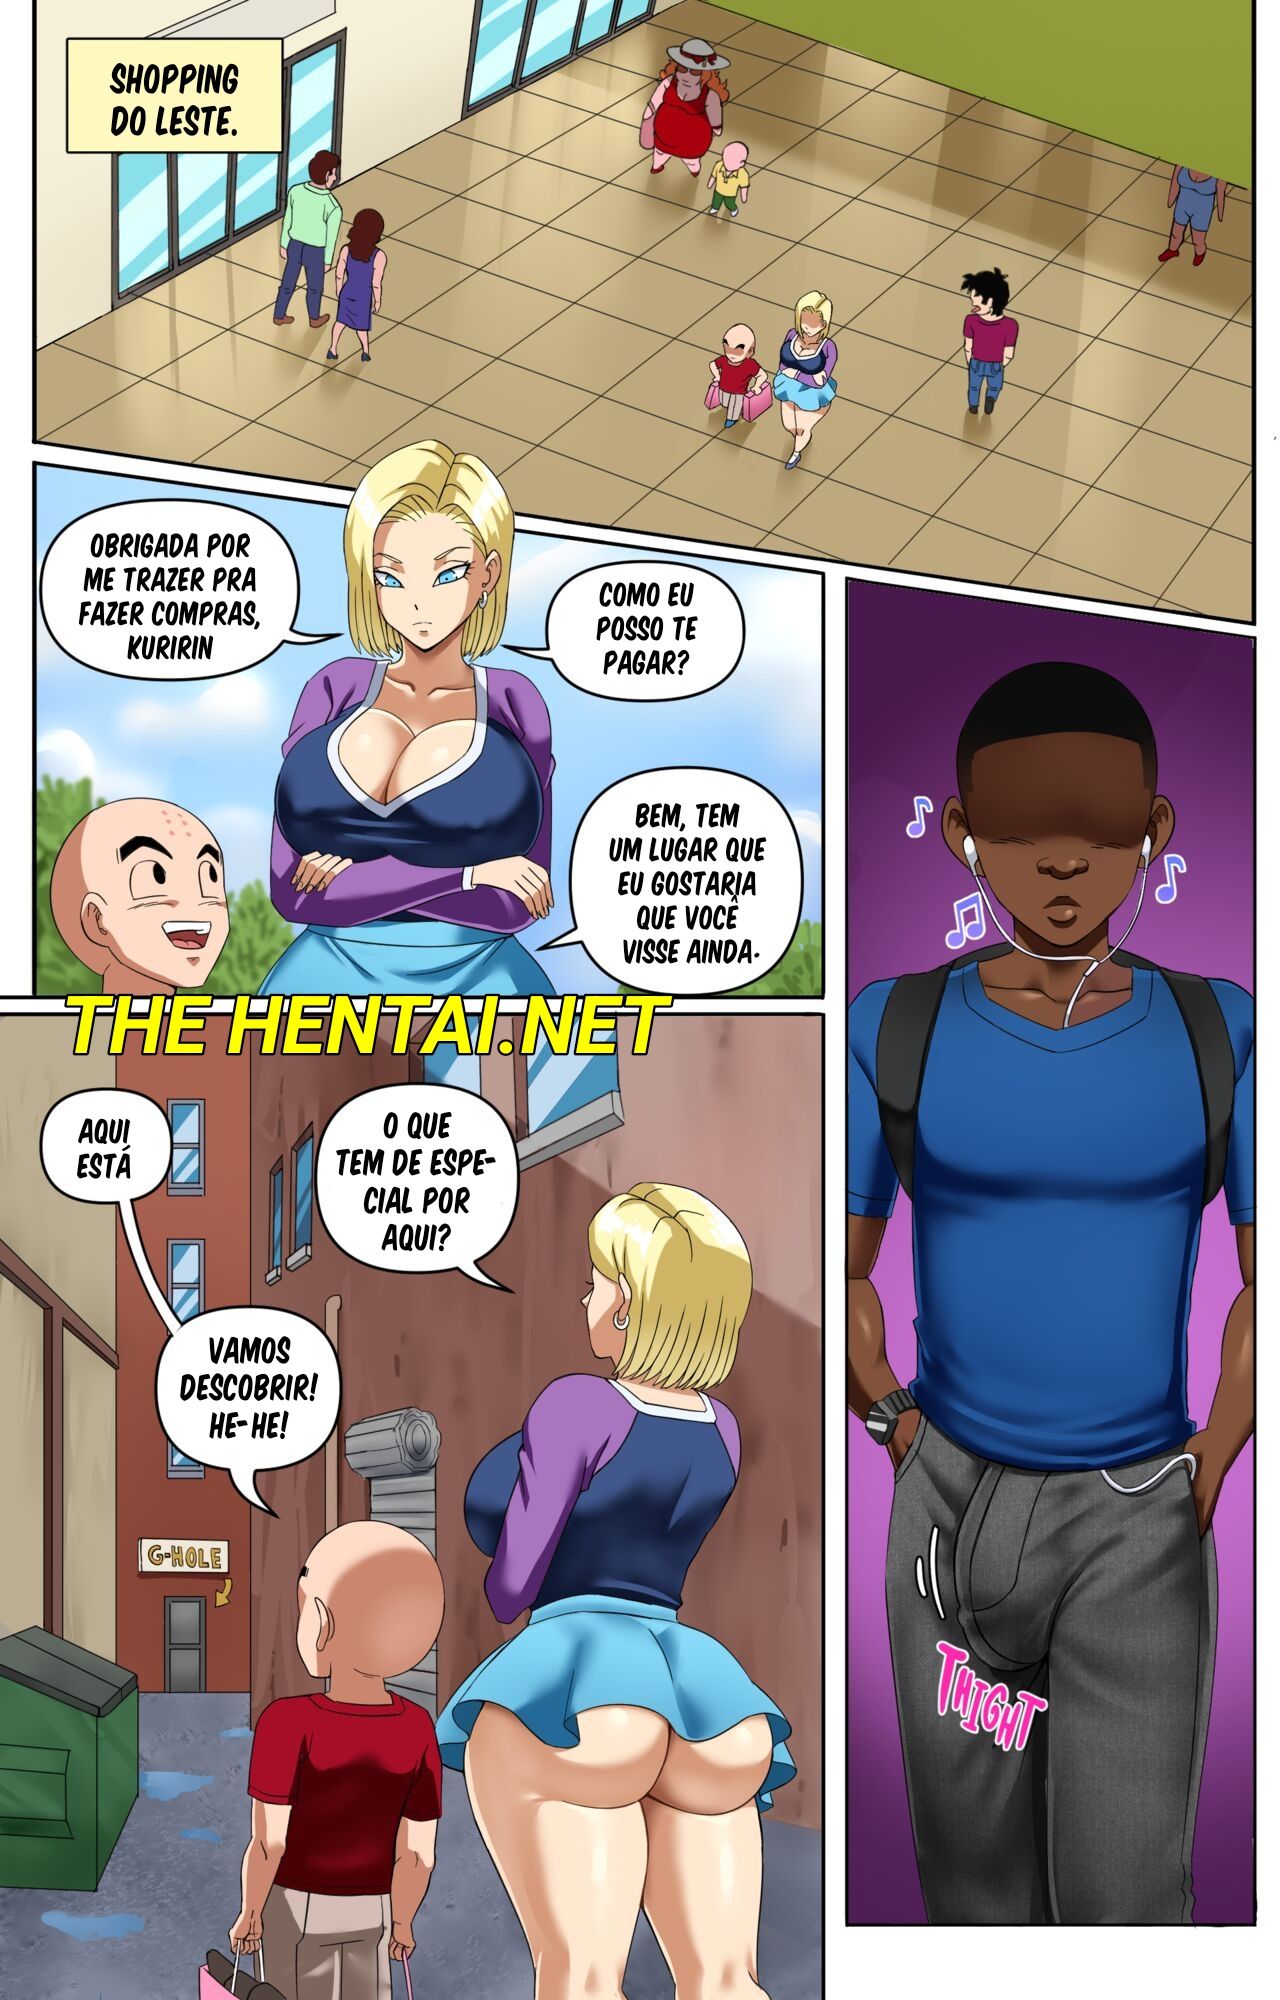 Android 18 NTR Part 4 Hentai pt-br 01